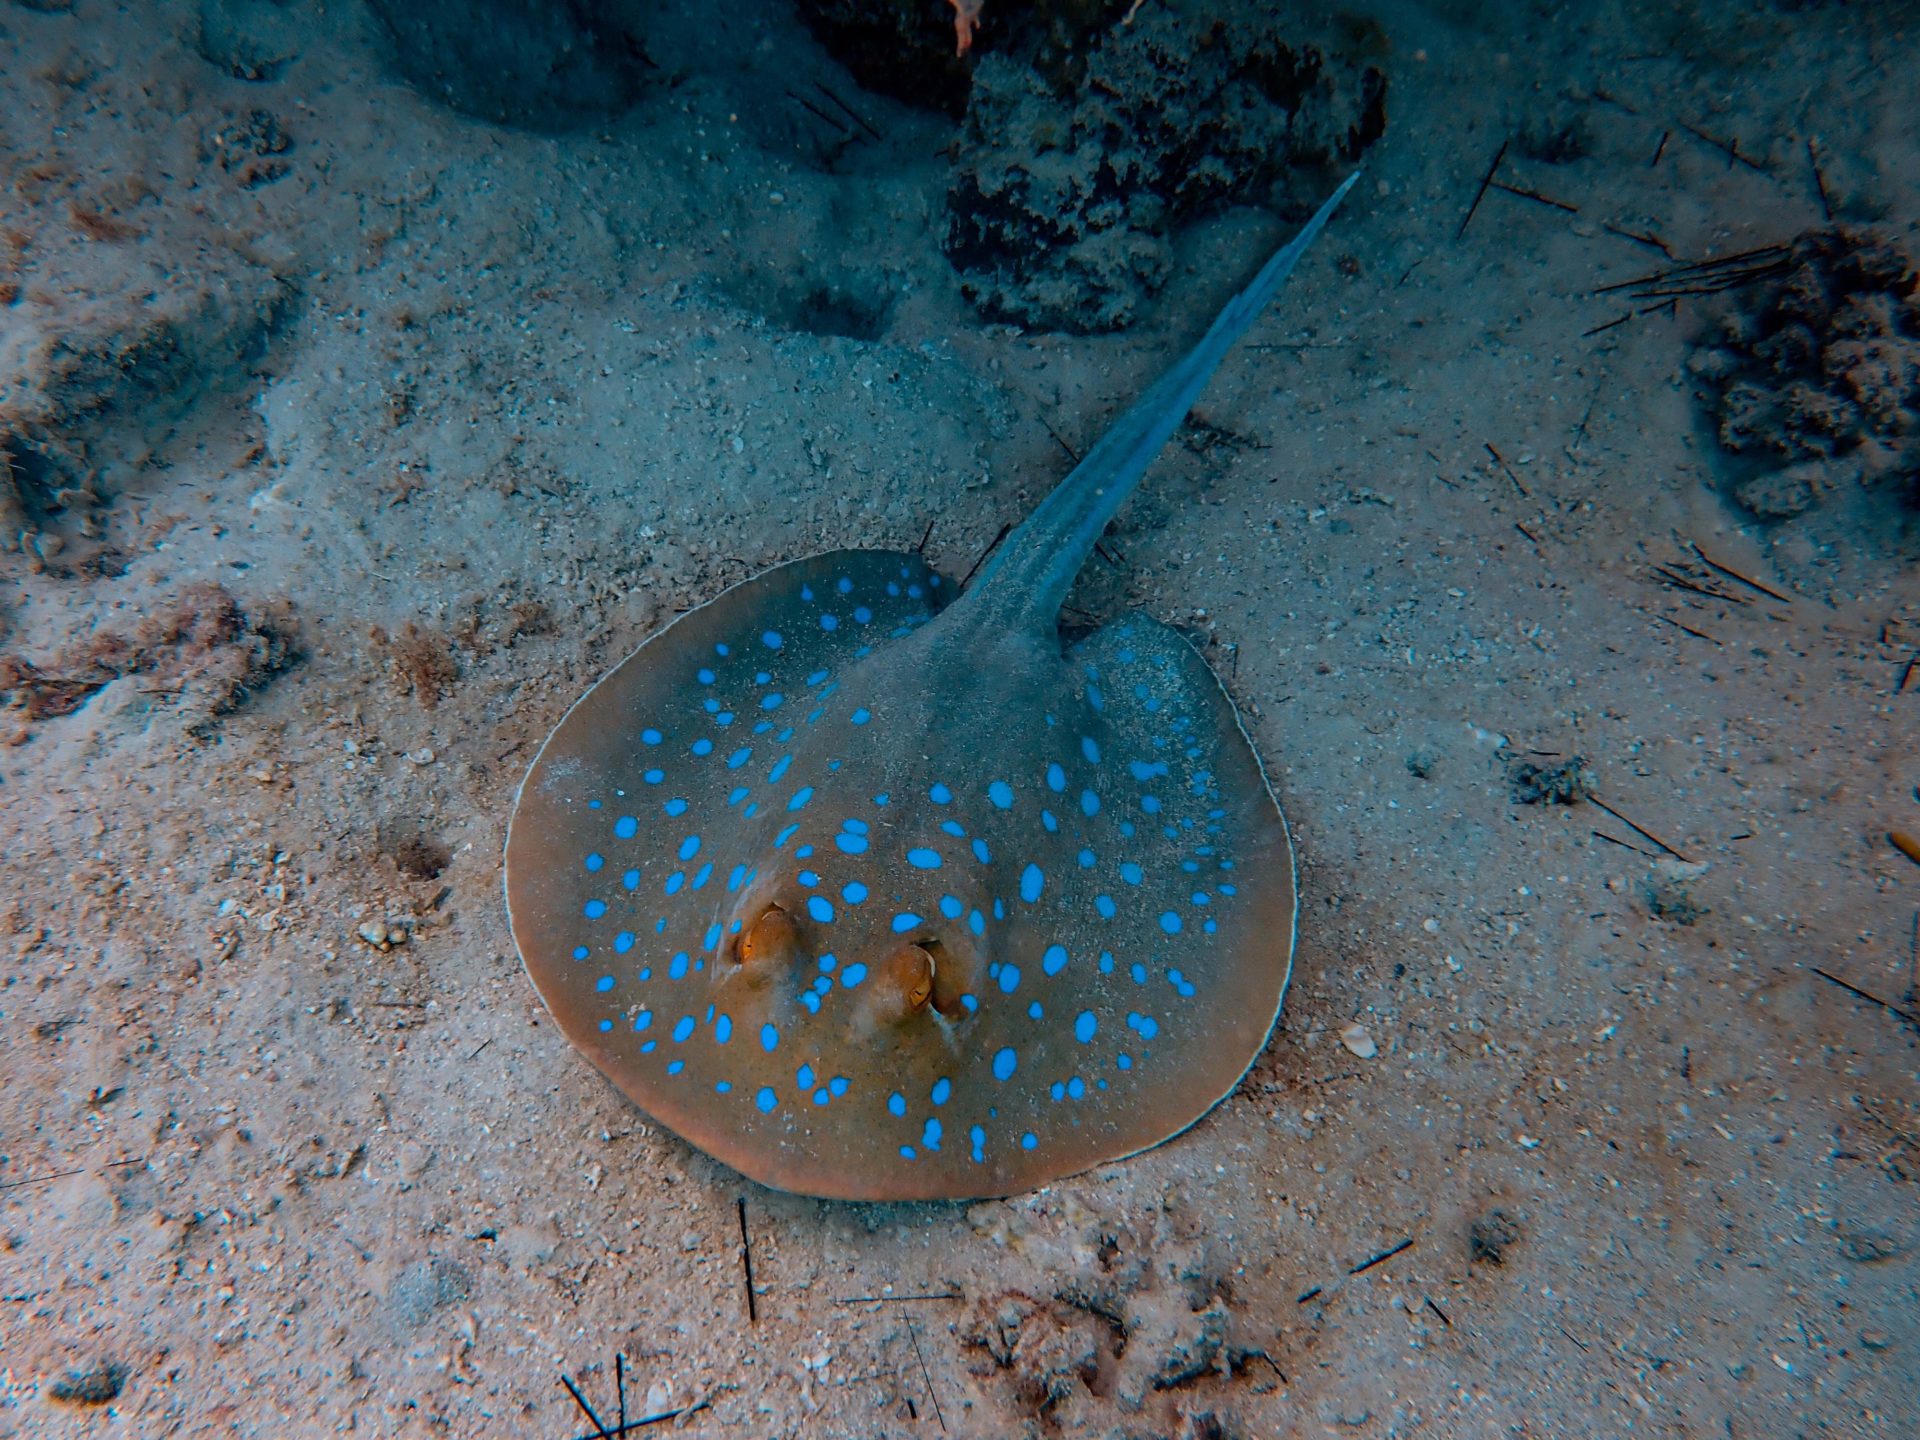 Protecting Ray Species | Ocean Conservation Trust